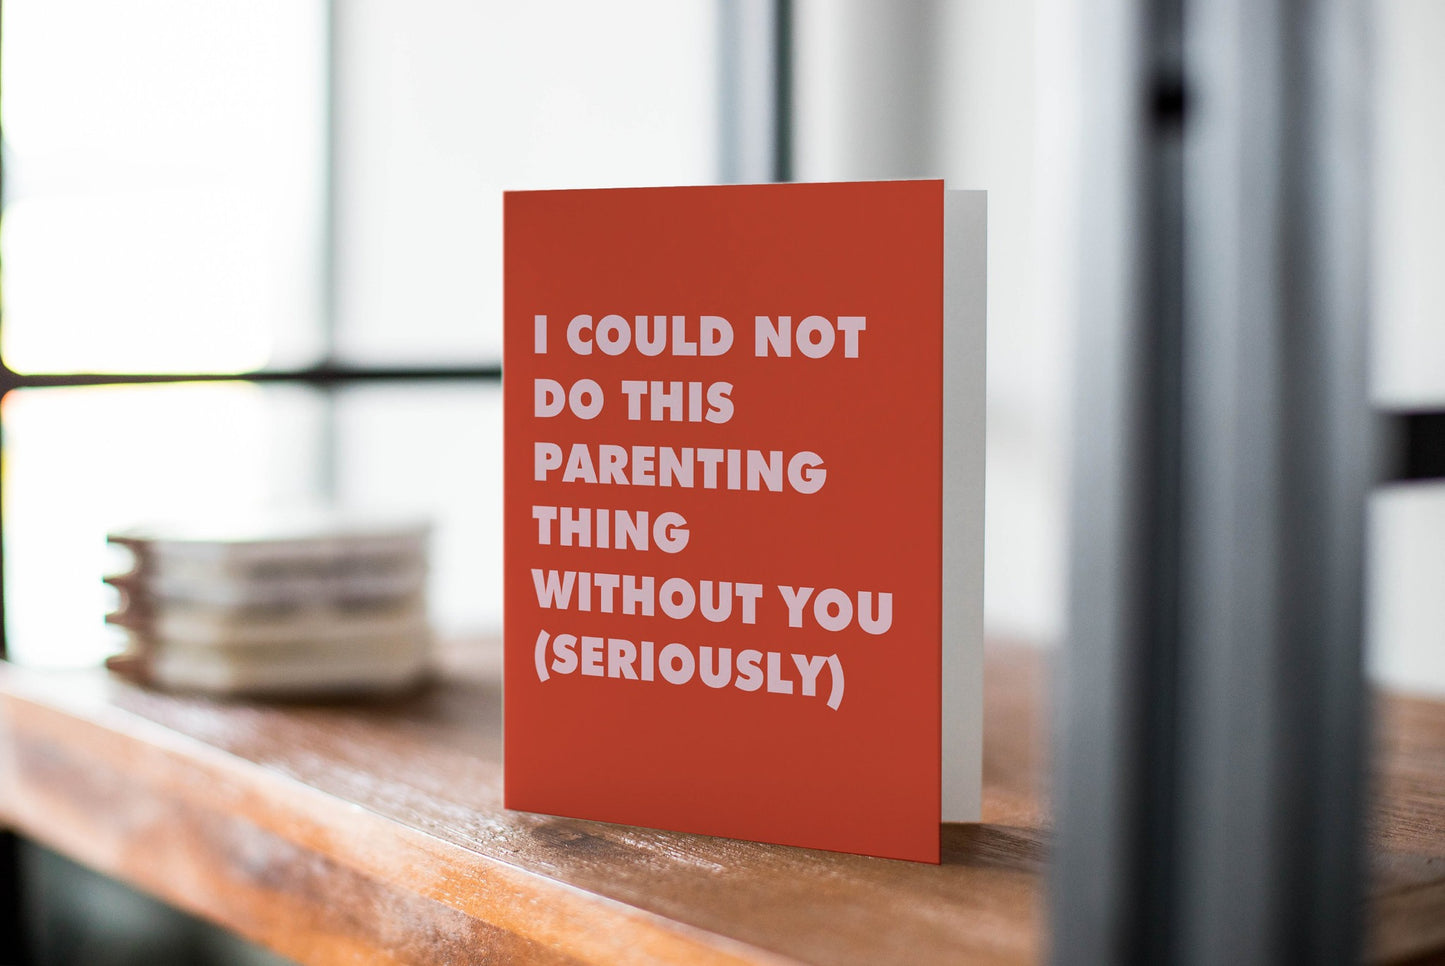 I Couldn't Do This Parenting Thing Without You - Seriously! Parenting Greeting Card.